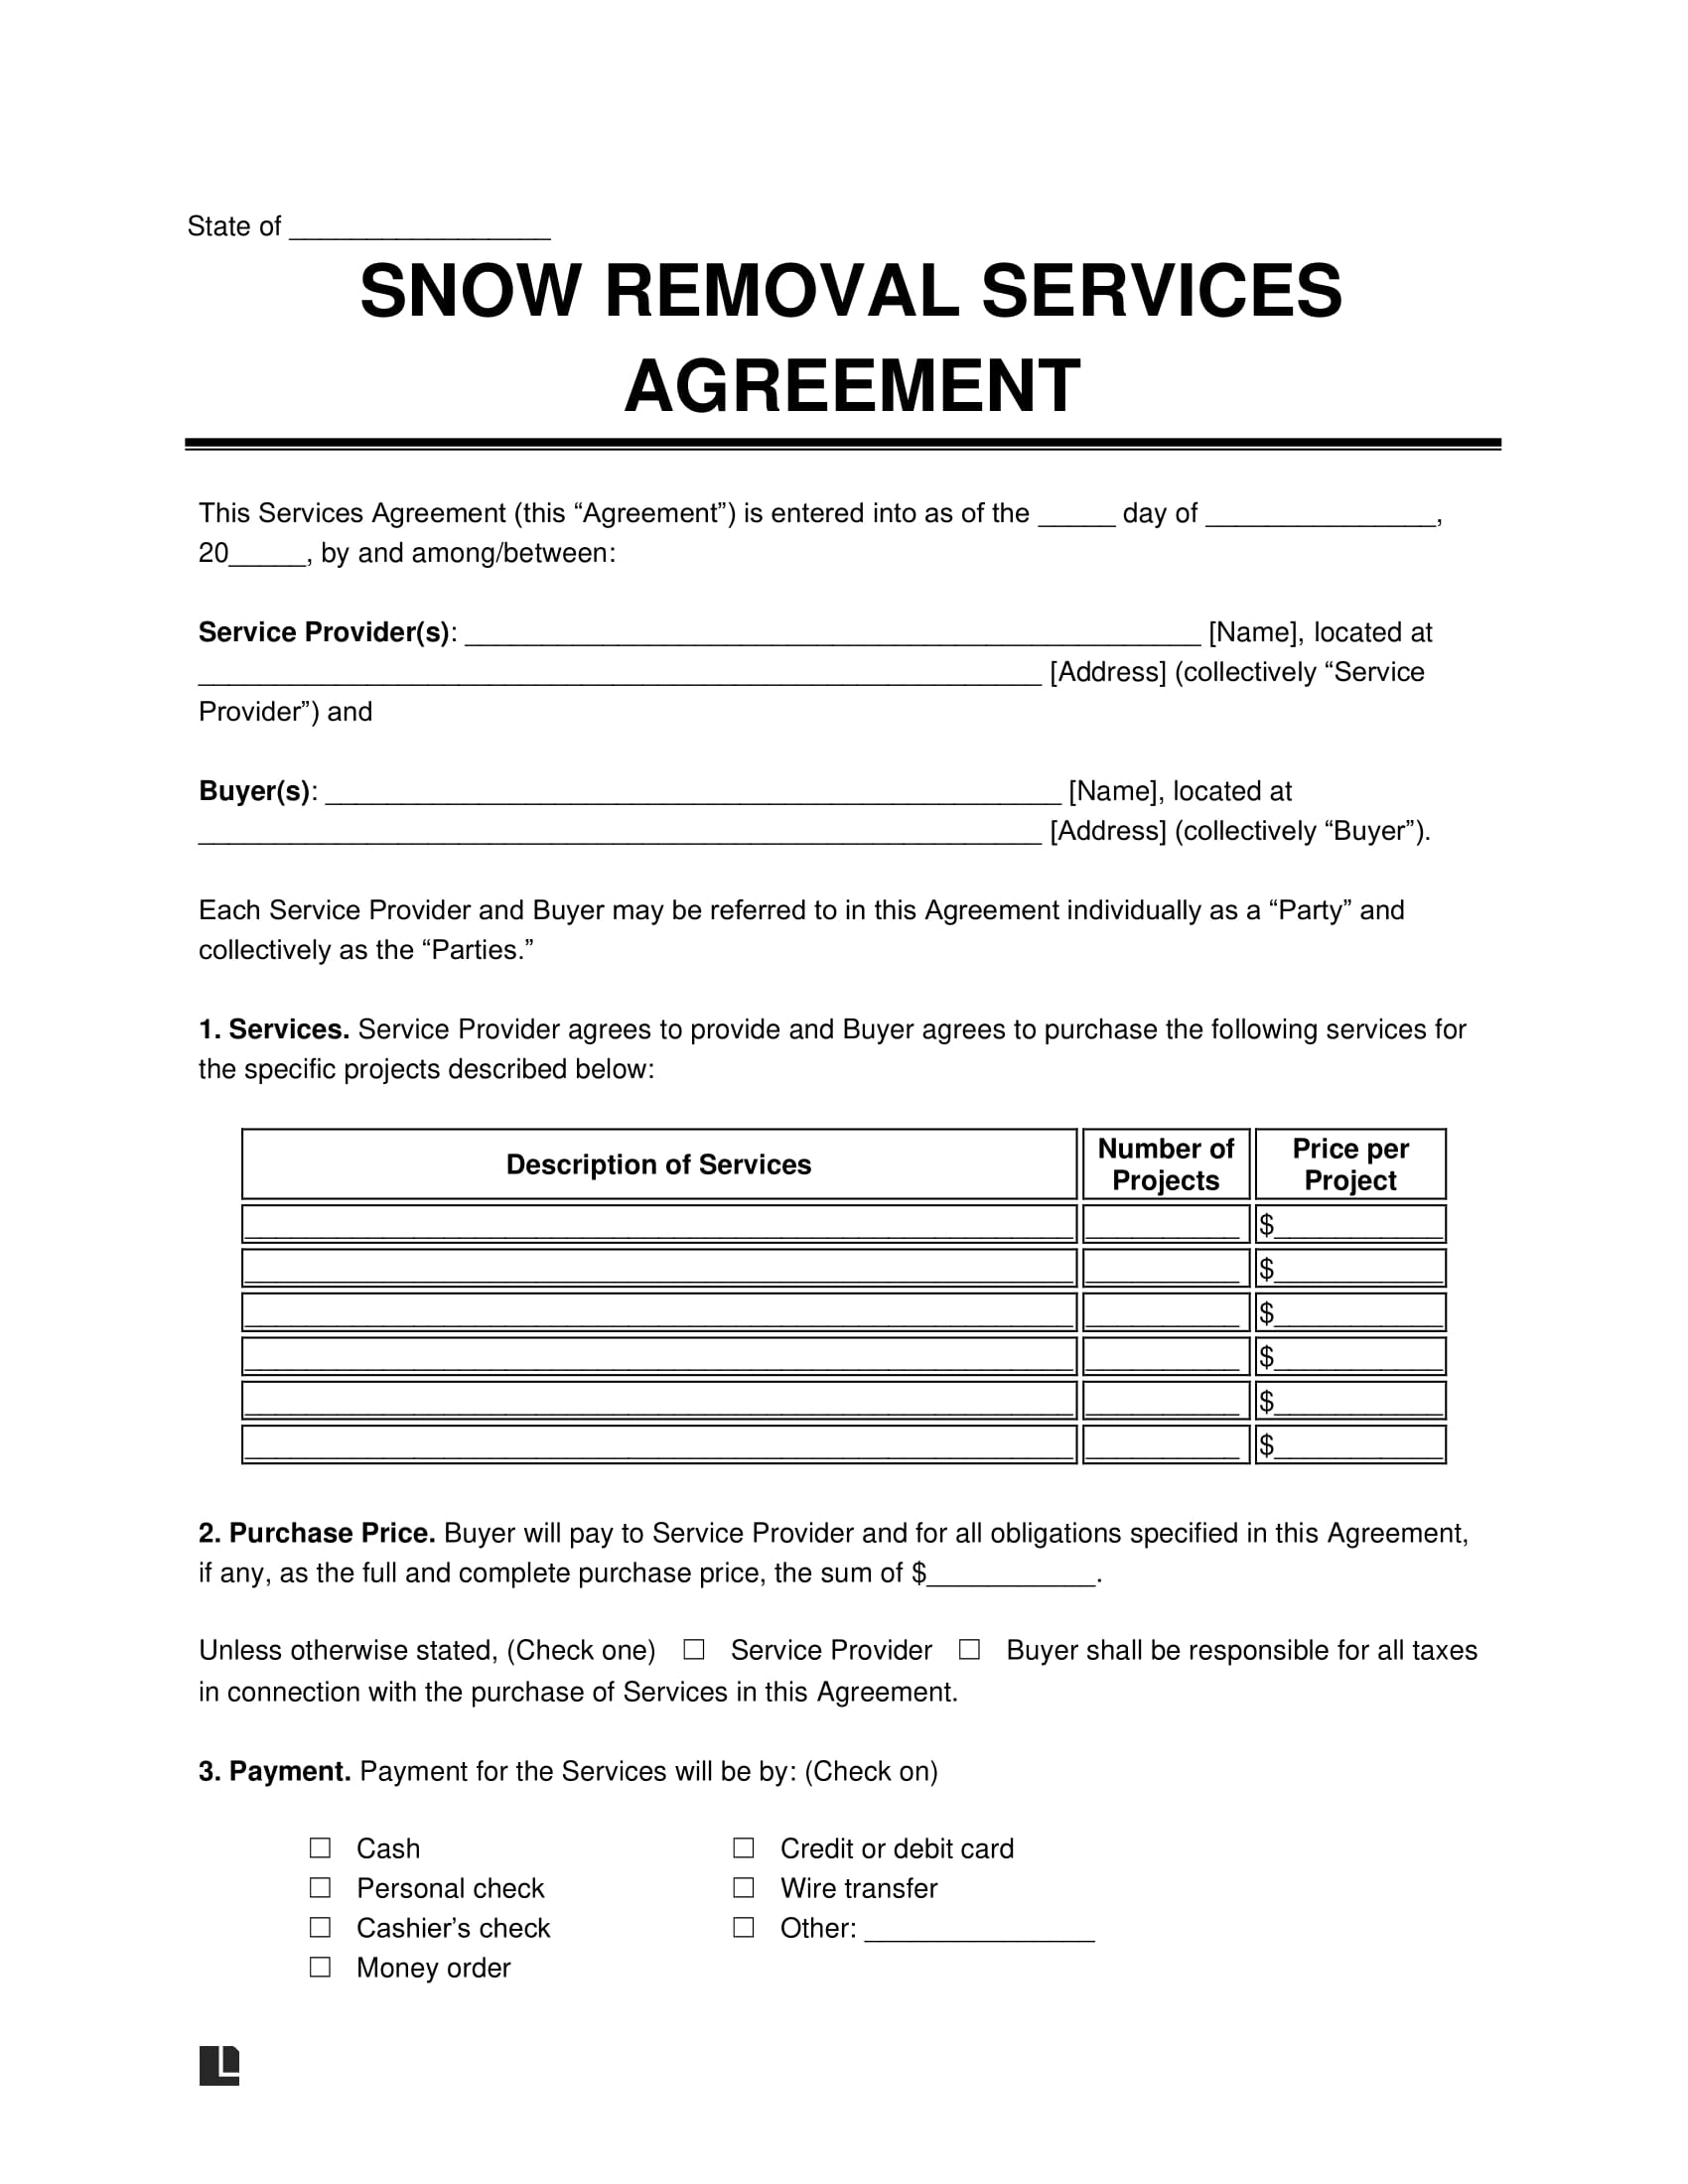 Snow Removal contract screenshot